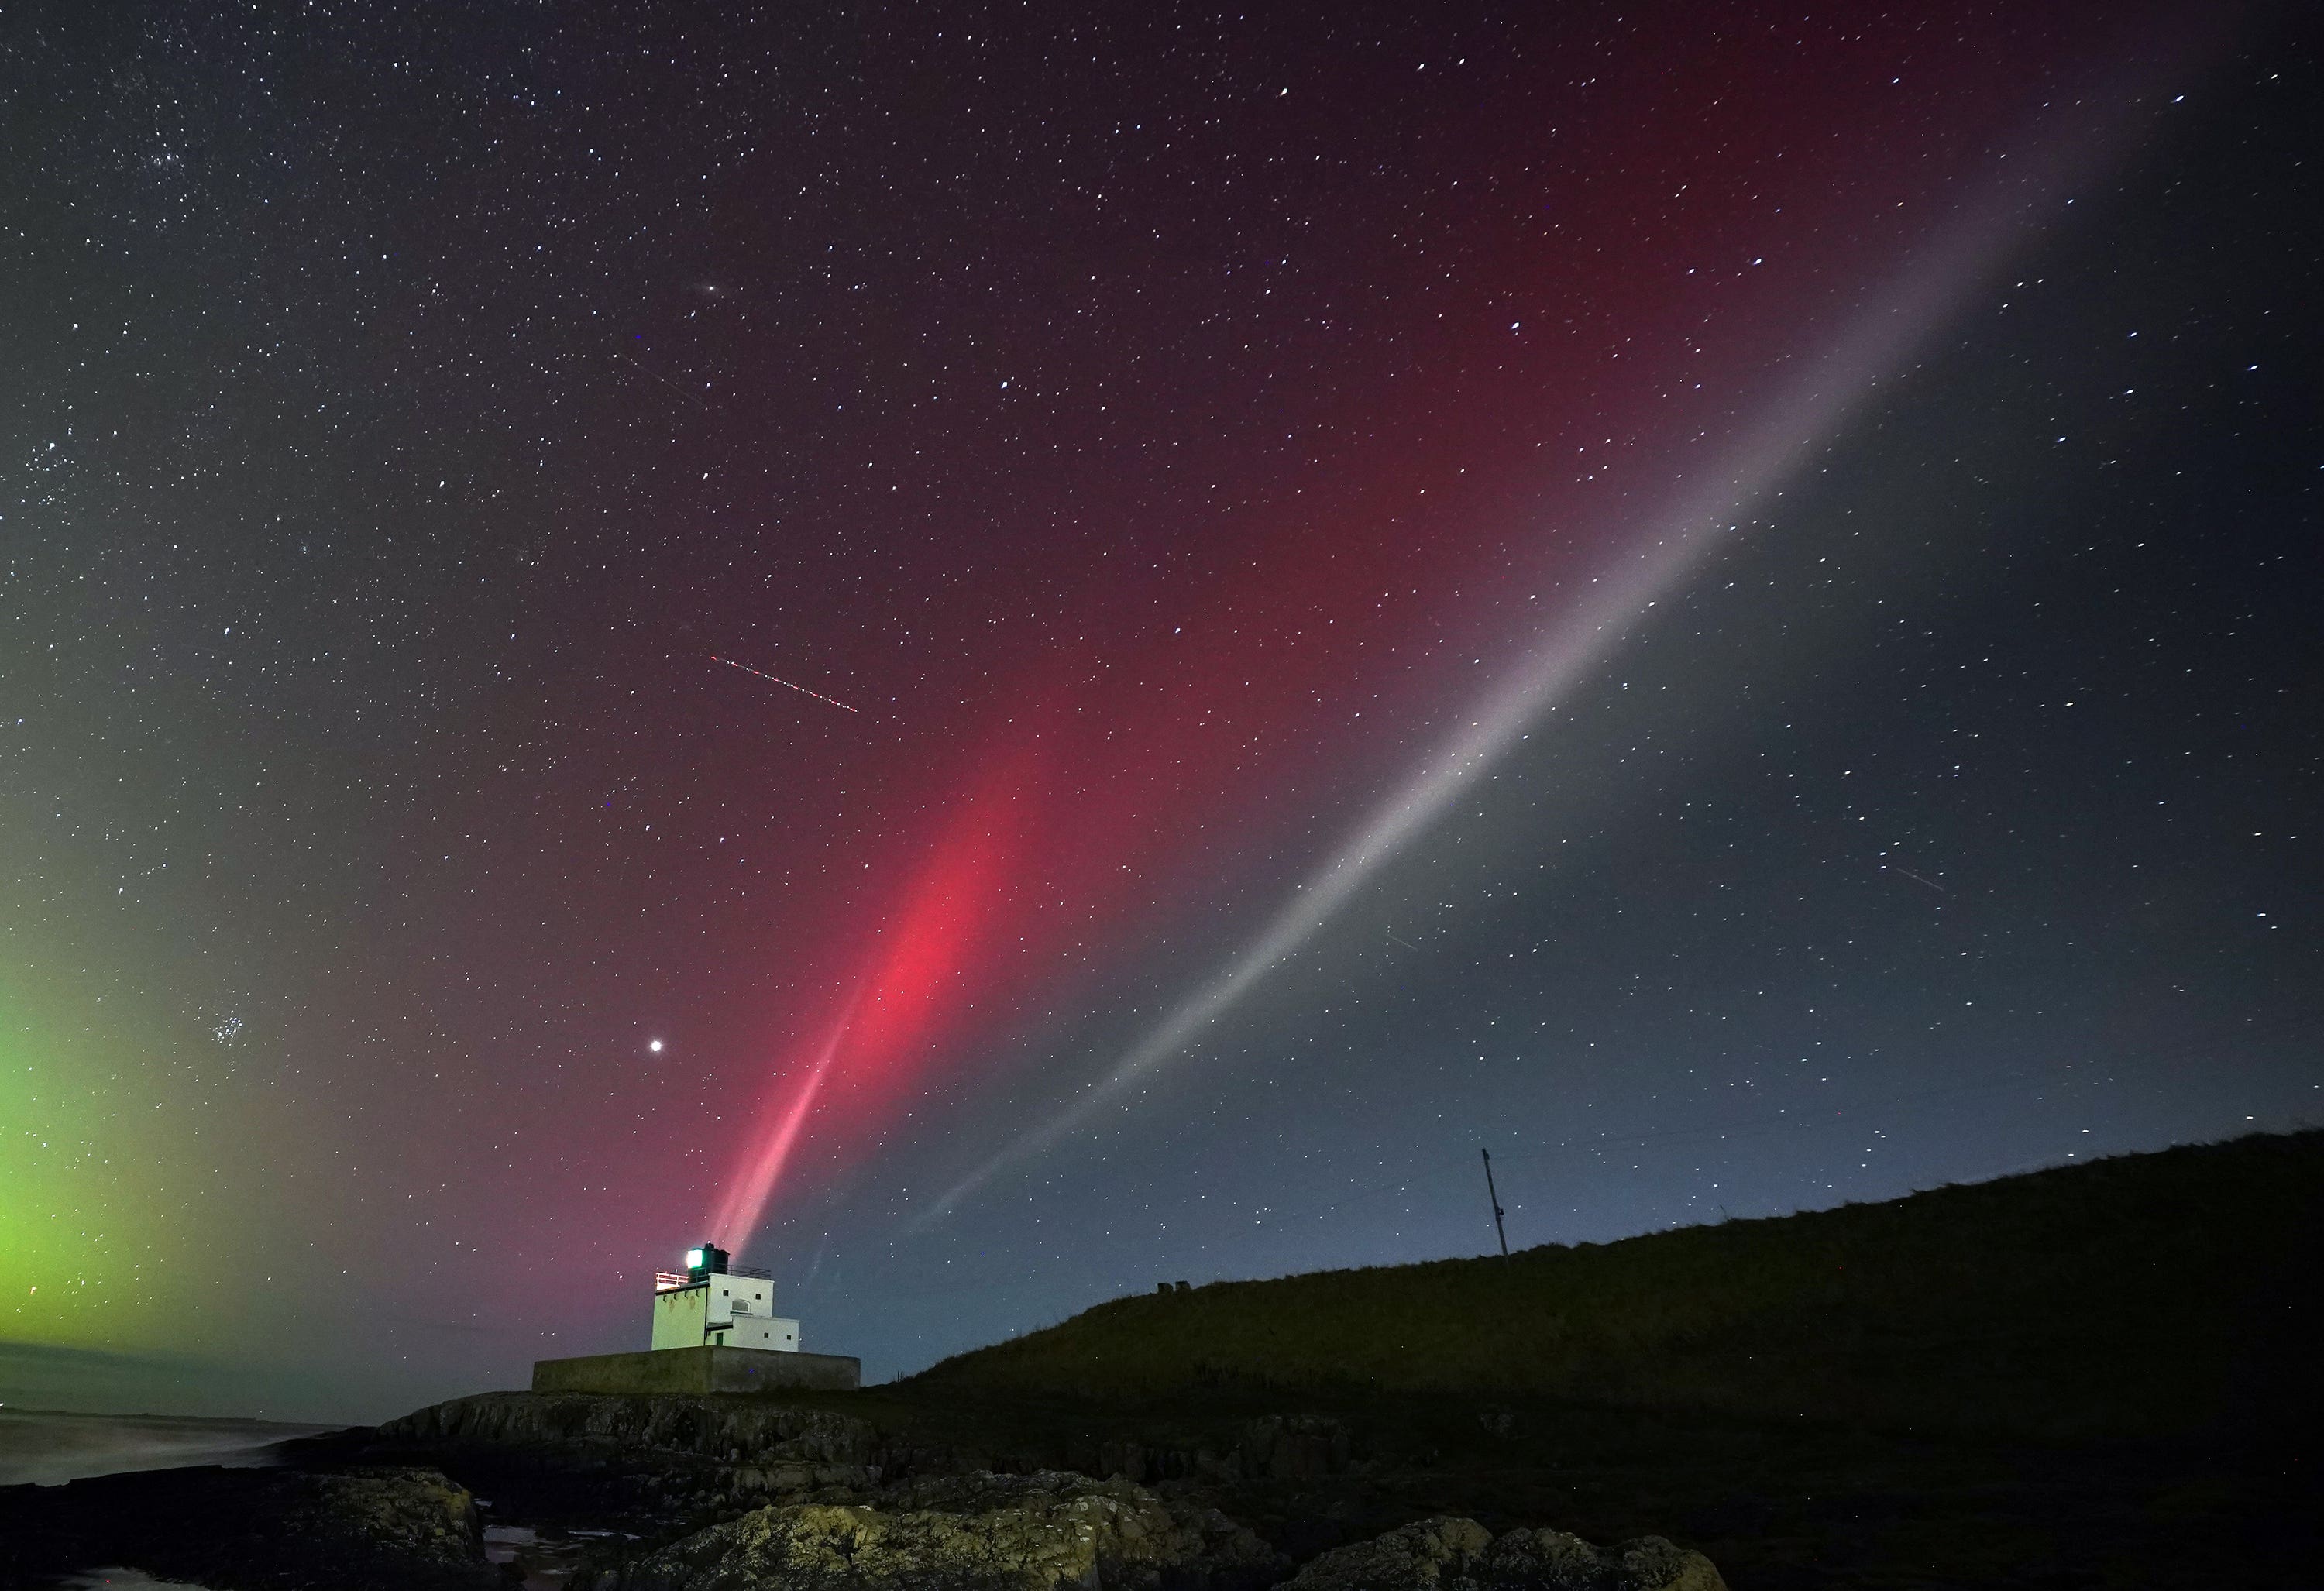 A strong thermal emission velocity enhancement, a rare aurora-like phenomenon named a STEVE in 2016 by scientists in Canada, can be seen over Bamburgh castle, in Northumberland.